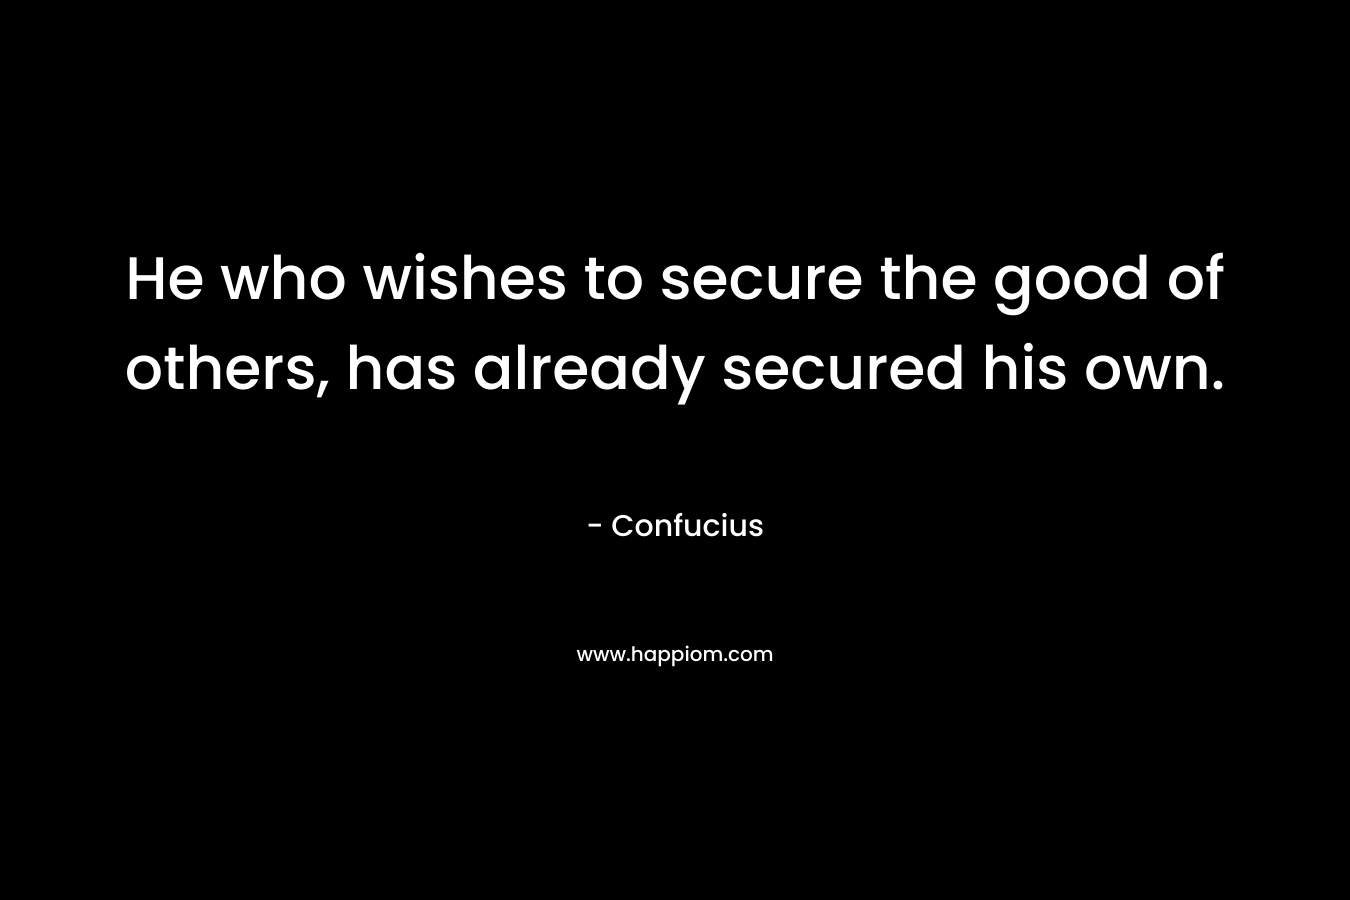 He who wishes to secure the good of others, has already secured his own. – Confucius